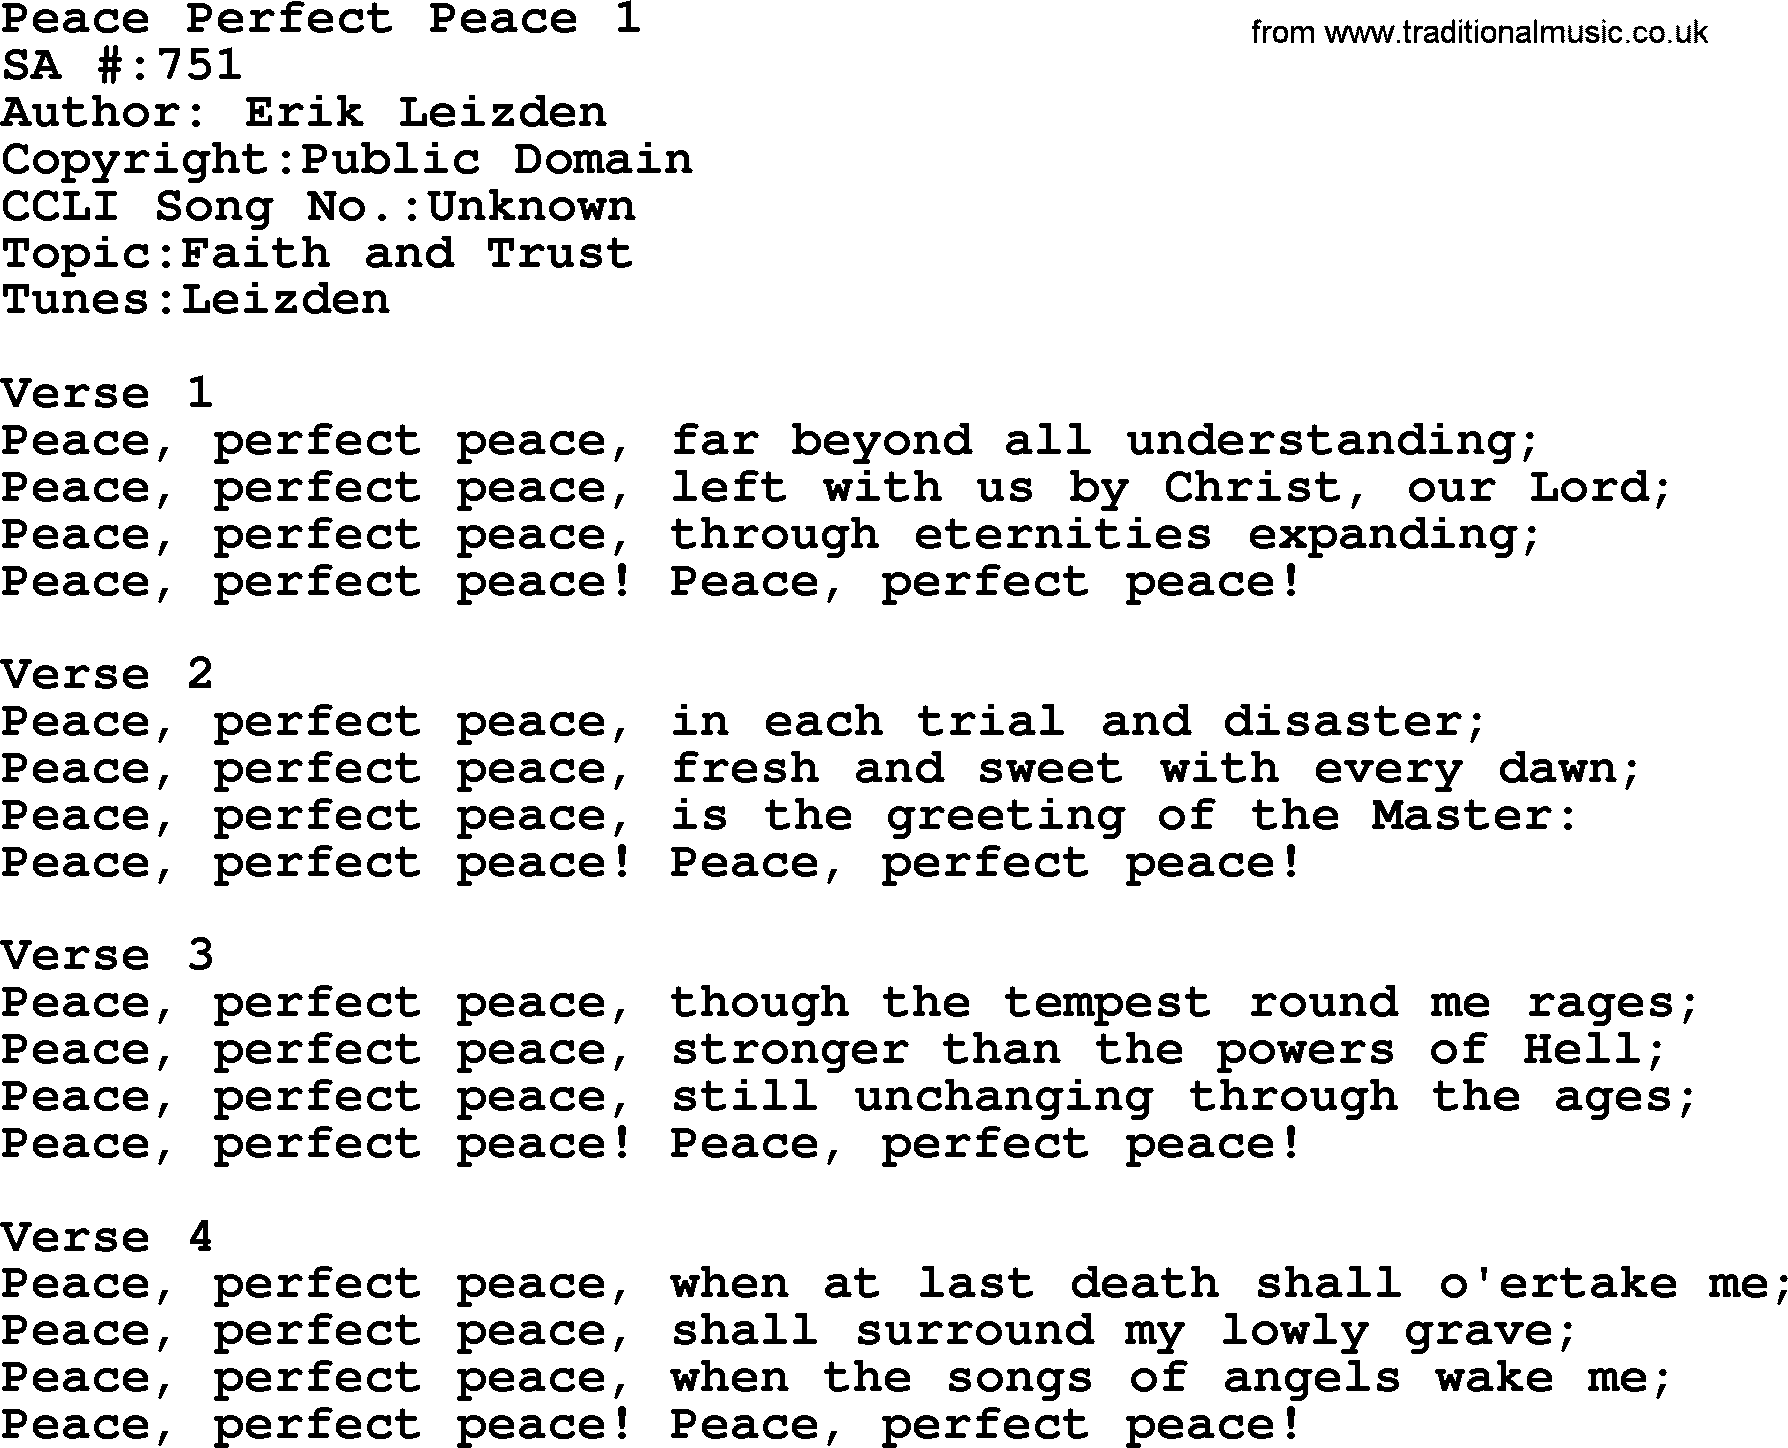 Salvation Army Hymnal, title: Peace Perfect Peace 1, with lyrics and PDF,